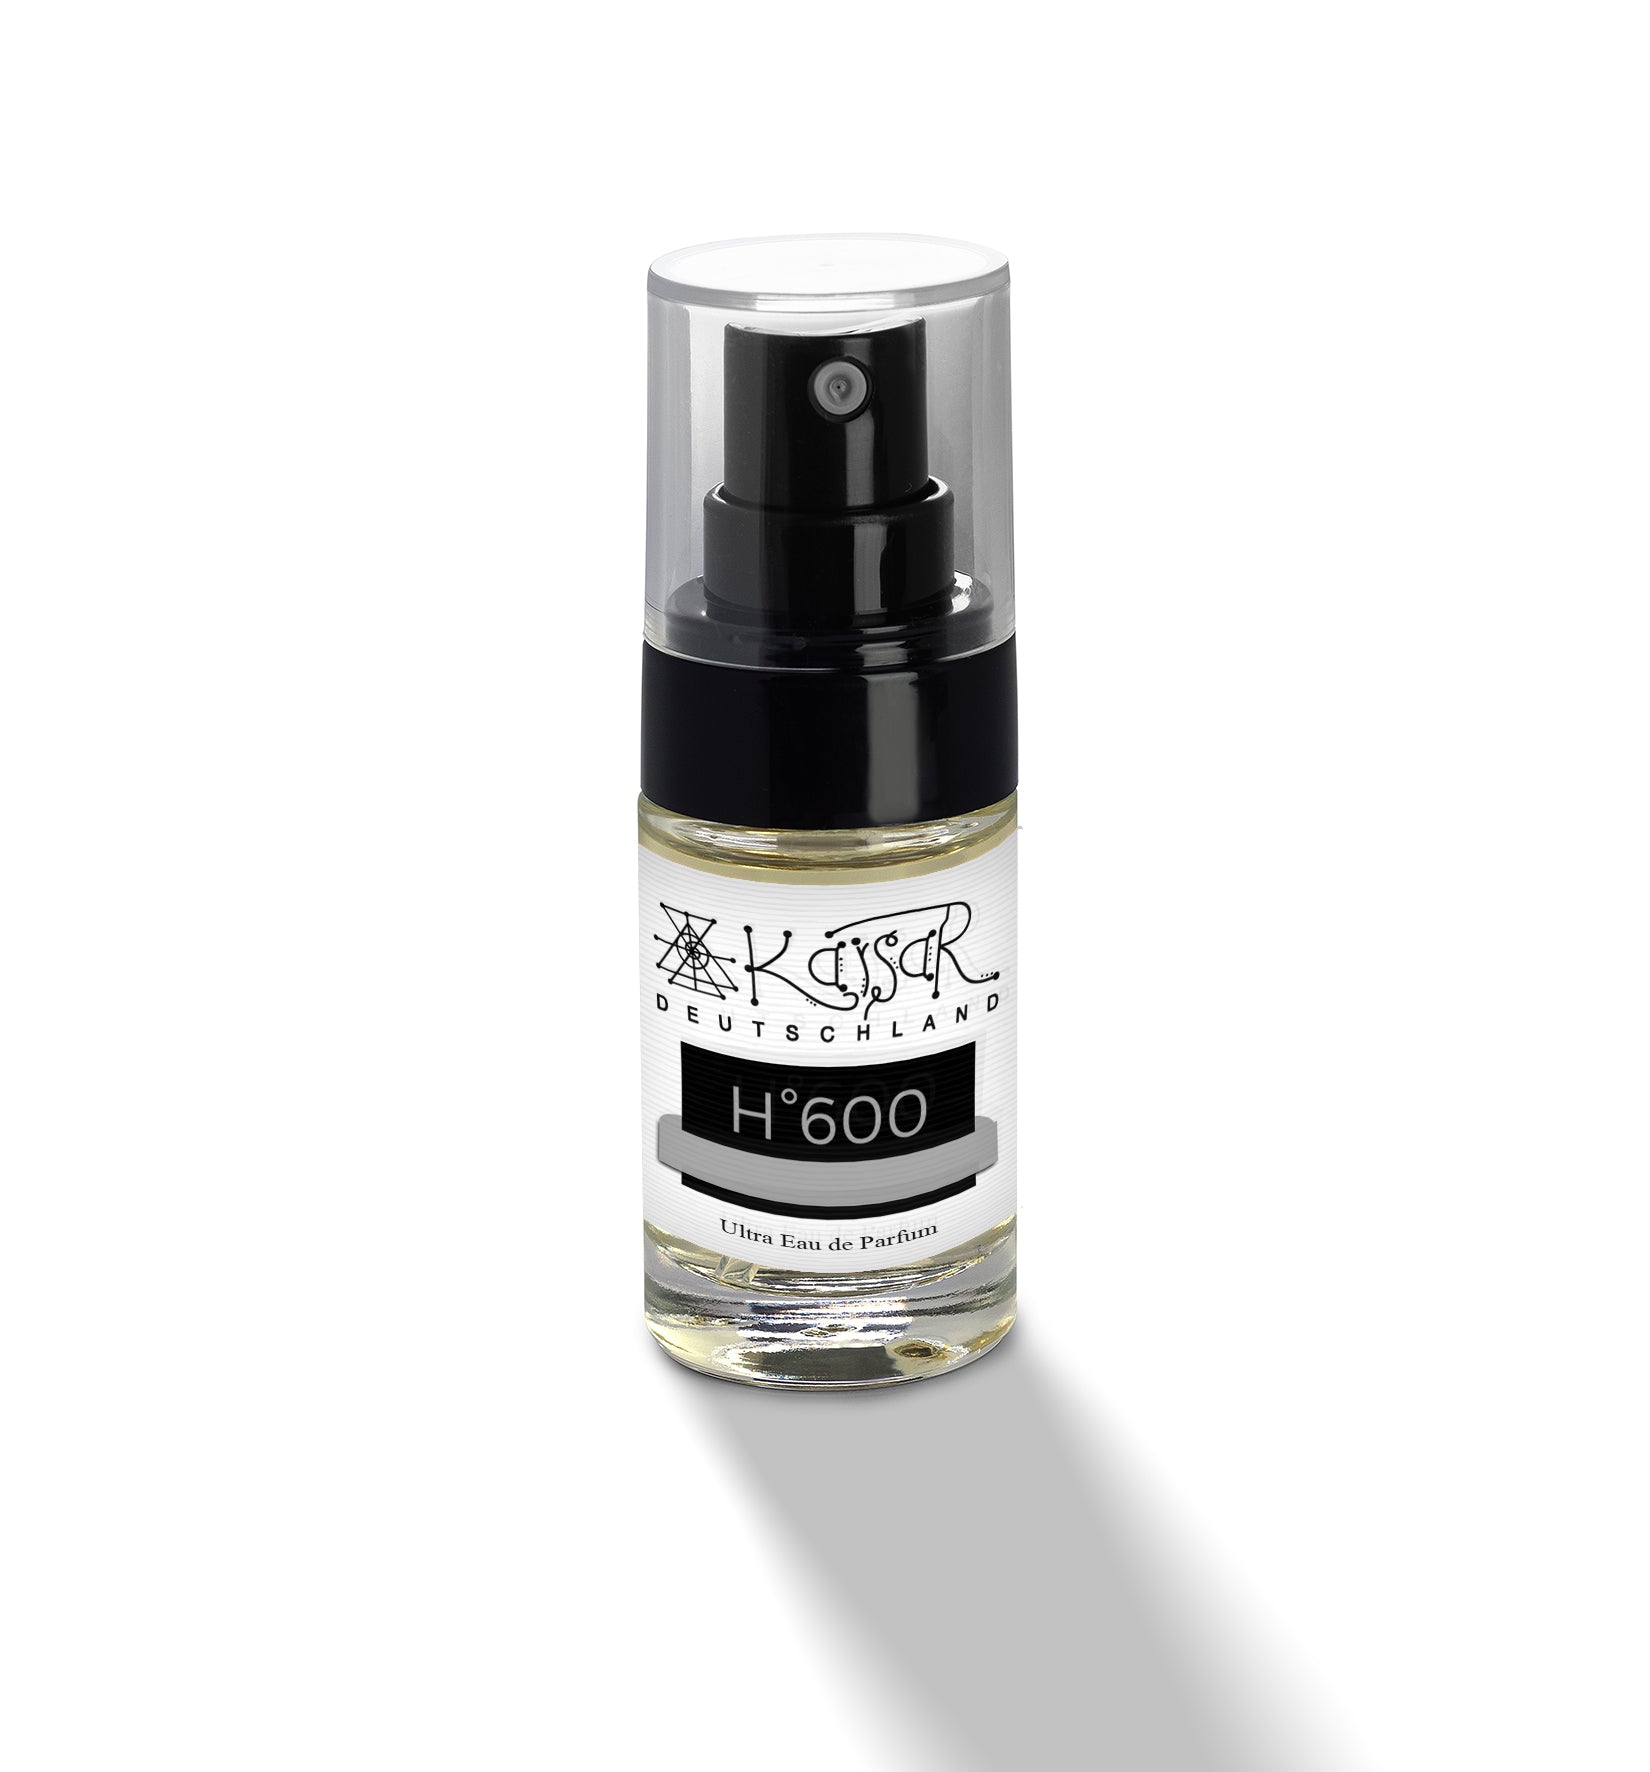 H°600 Silver Shadow Man Scent